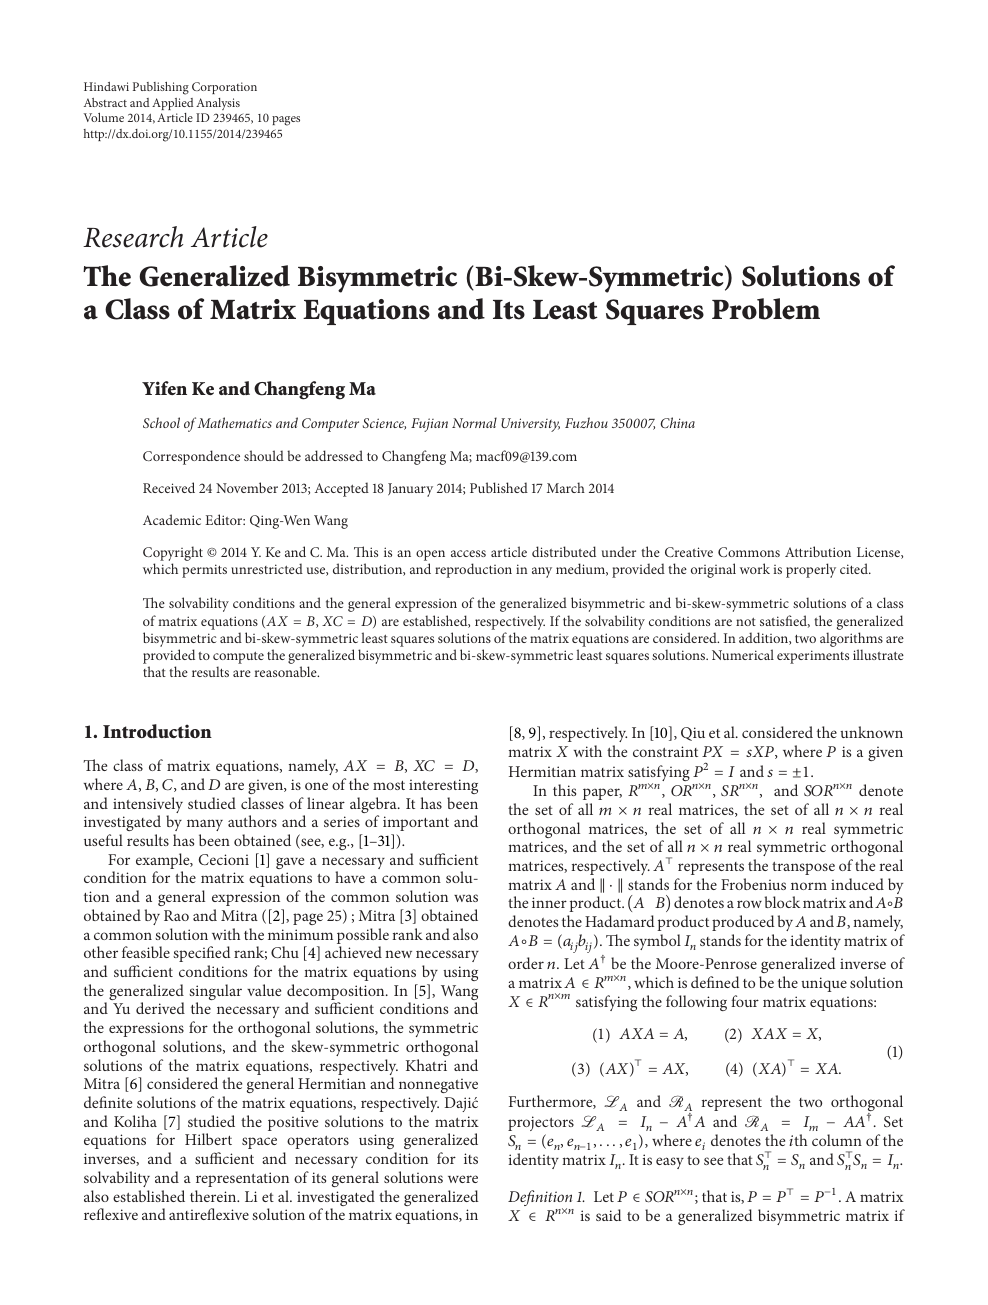 The Generalized Bisymmetric Bi Skew Symmetric Solutions Of A Class Of Matrix Equations And Its Least Squares Problem Topic Of Research Paper In Mathematics Download Scholarly Article Pdf And Read For Free On